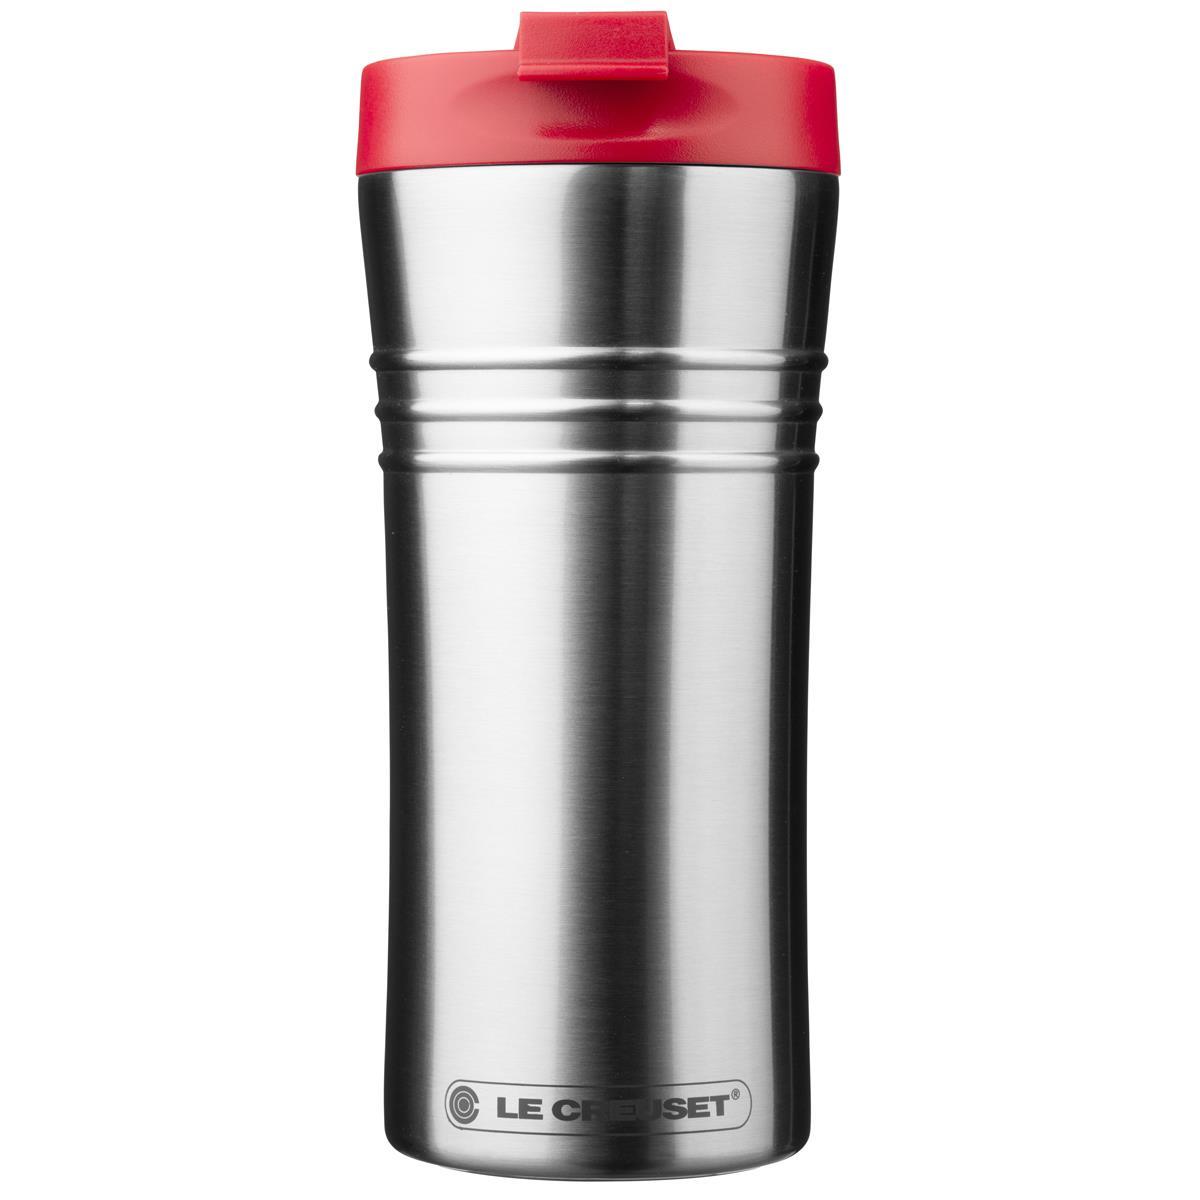 What features in the Le Creuset travel mug maintain beverage temperature?